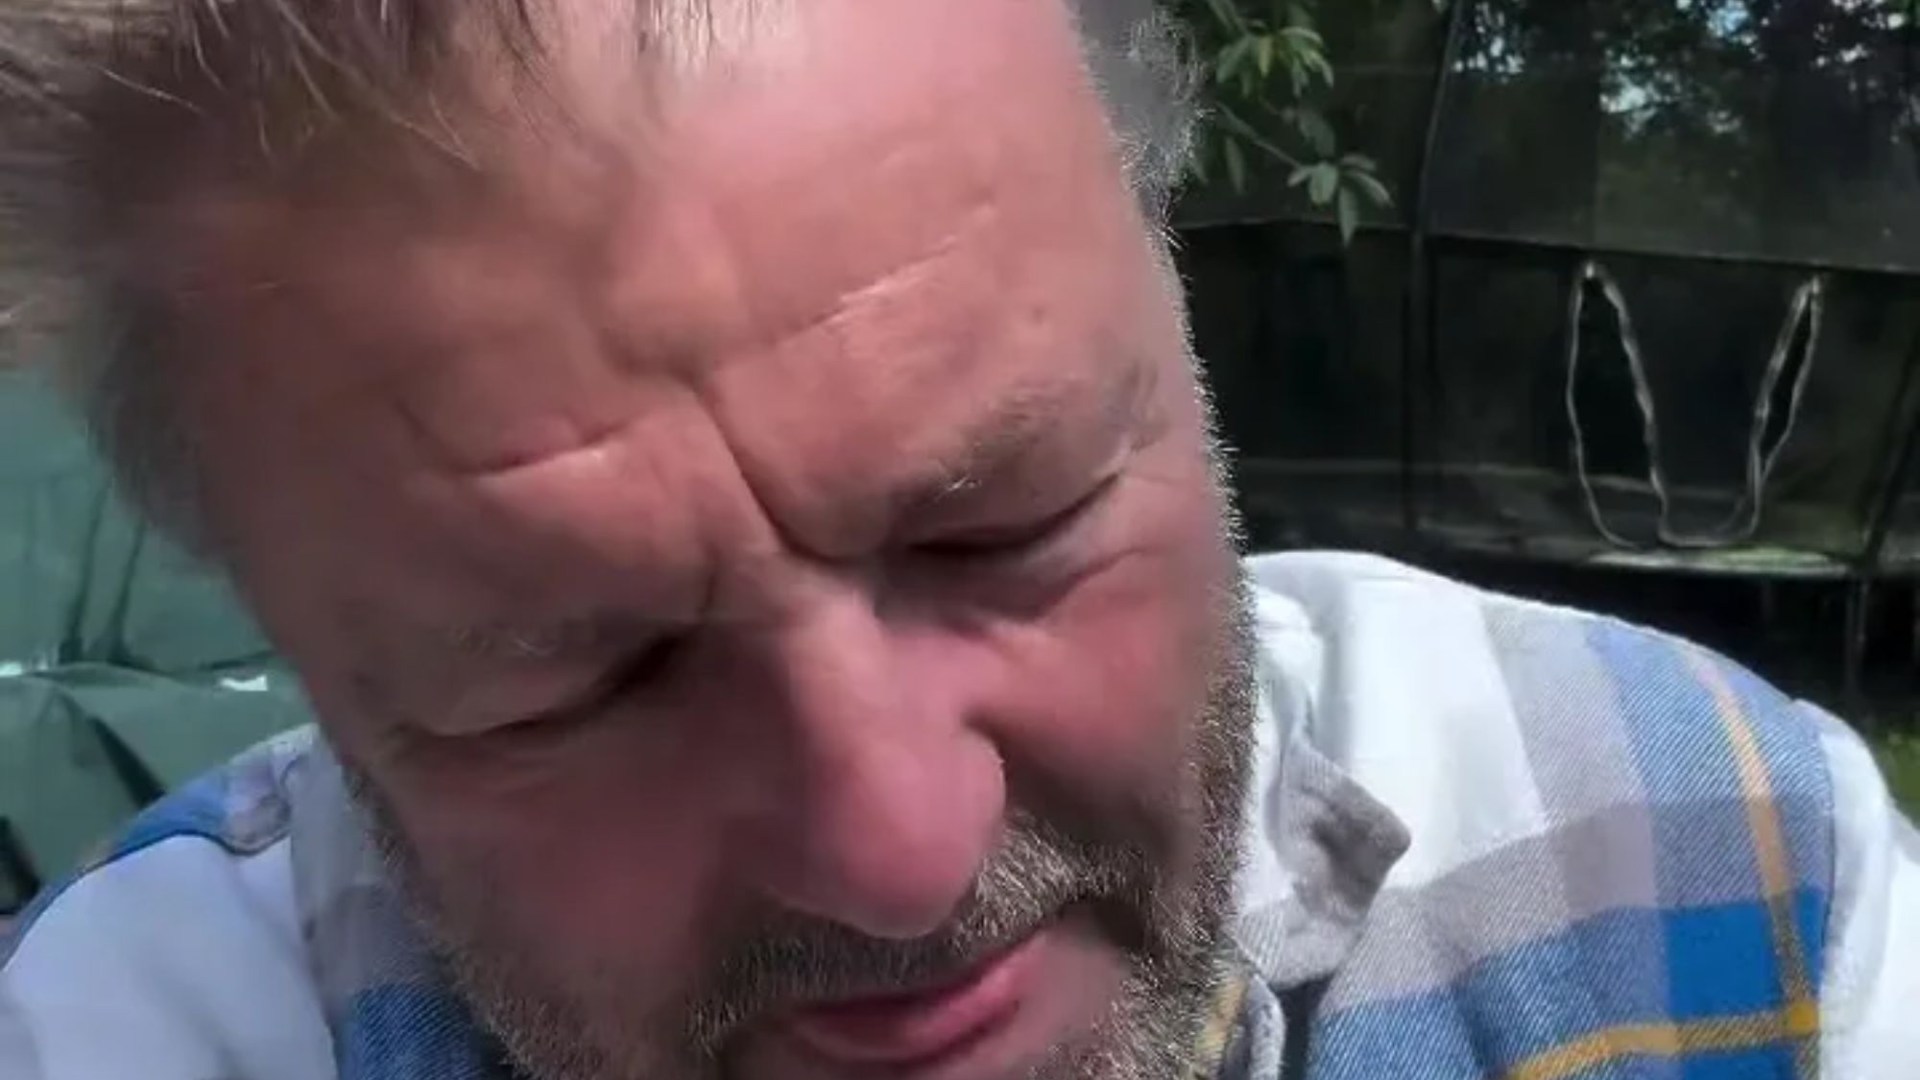 Homes Under the Hammer’s Martin Roberts fights back tears as he opens up about ‘personal struggle’ in emotional vid [Video]